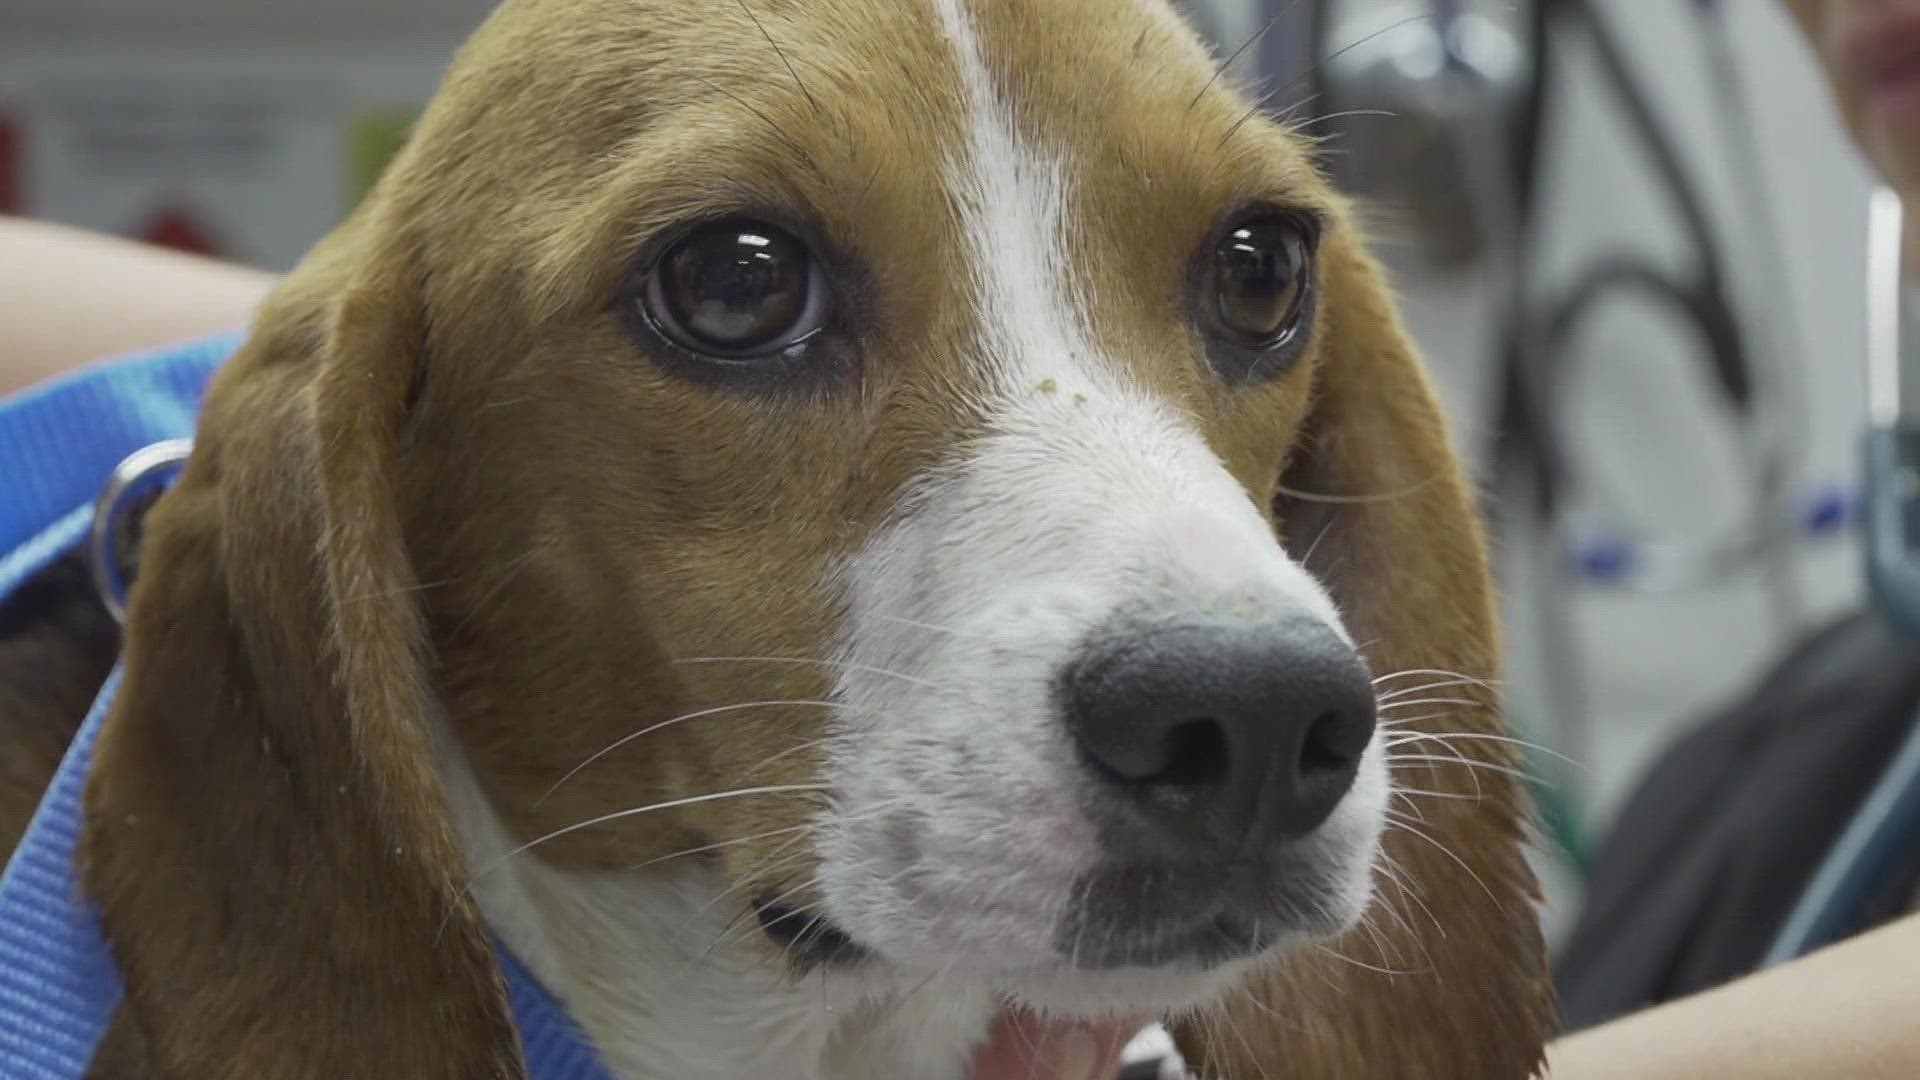 Around 4,000 beagles were rescued from the Virginia breeding and research facility in July. After several animal welfare violations, including painful treatments.